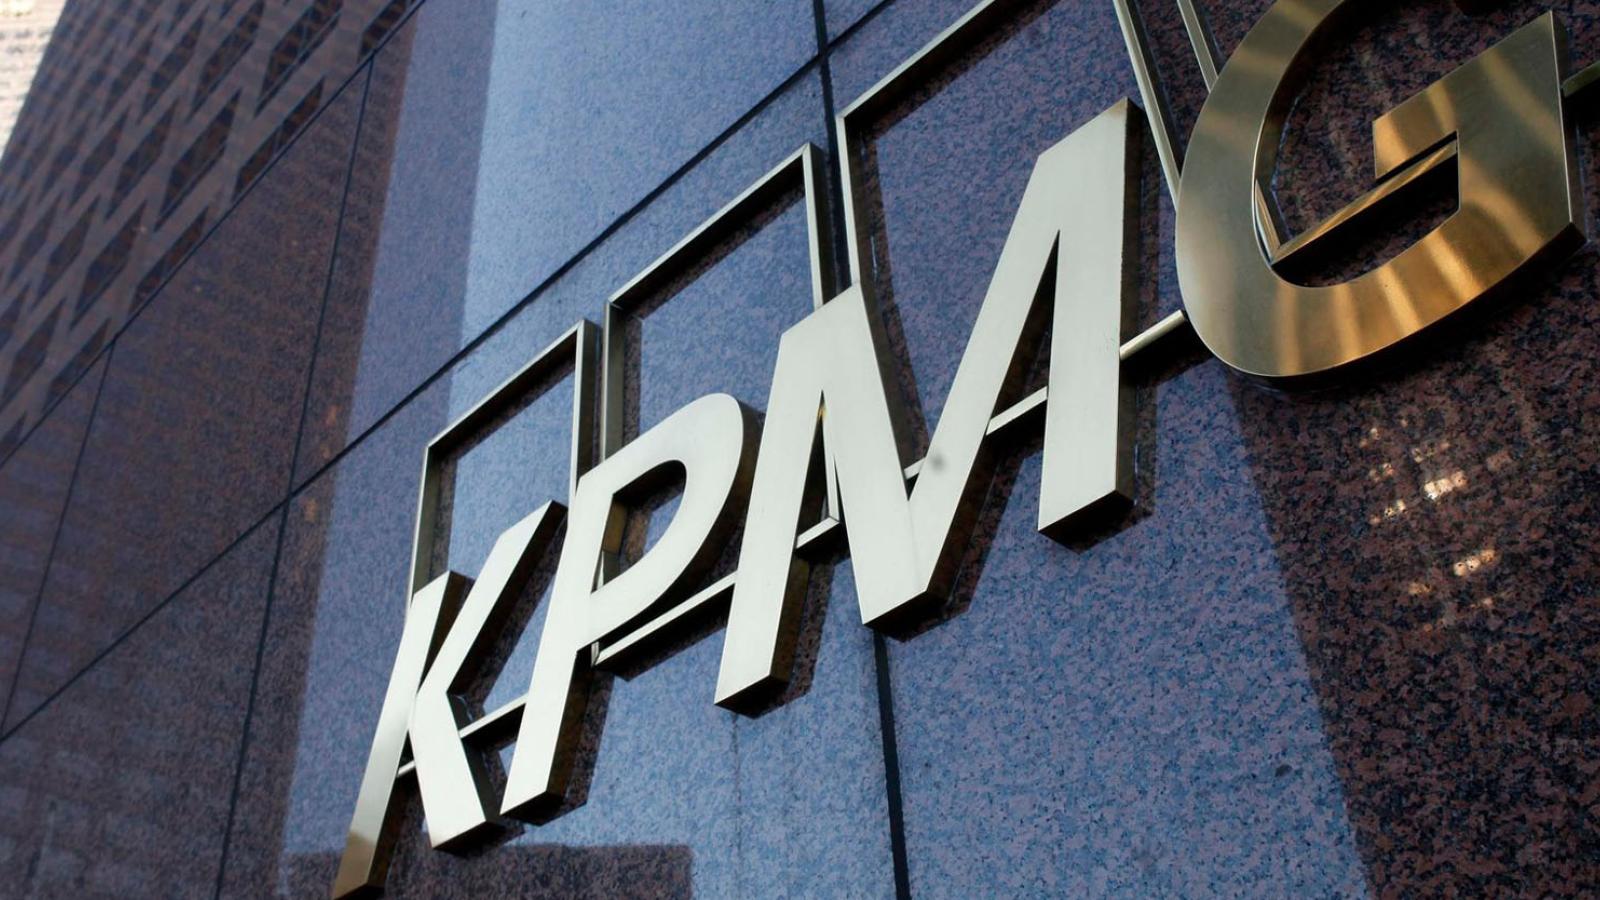 office building with exterior KPMG sign